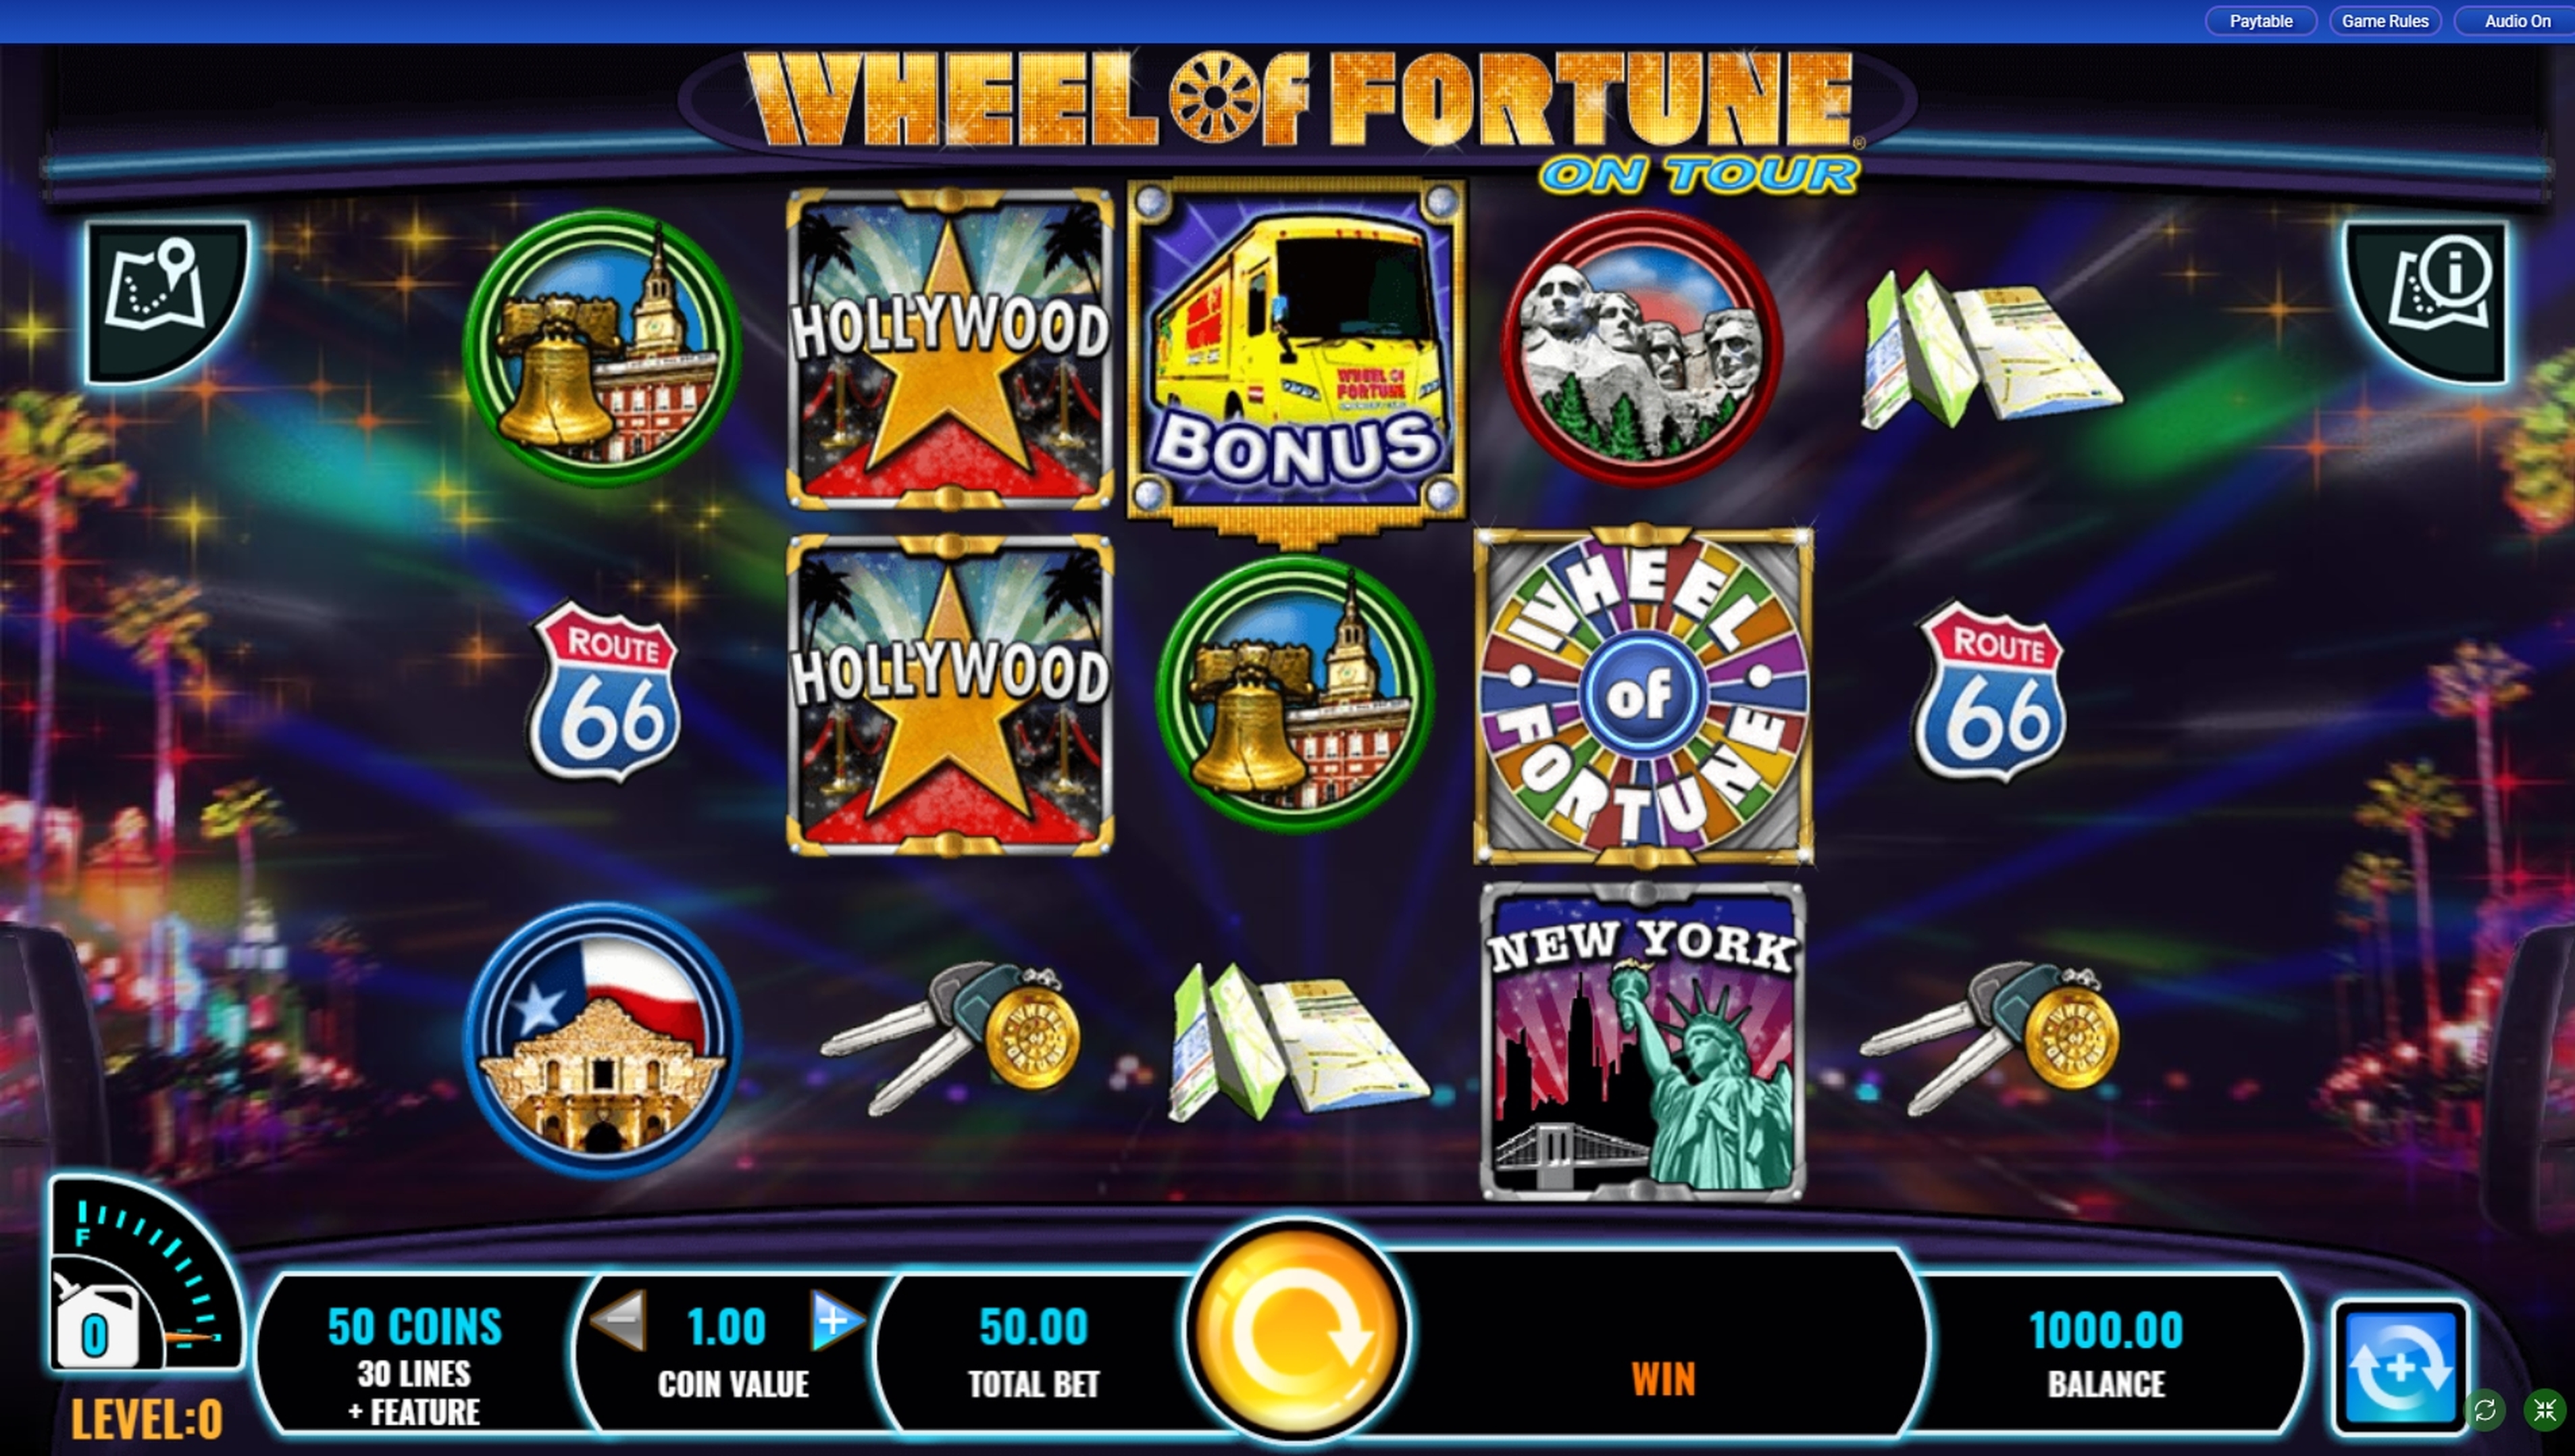 Reels in Wheel of Fortune on tour Slot Game by IGT